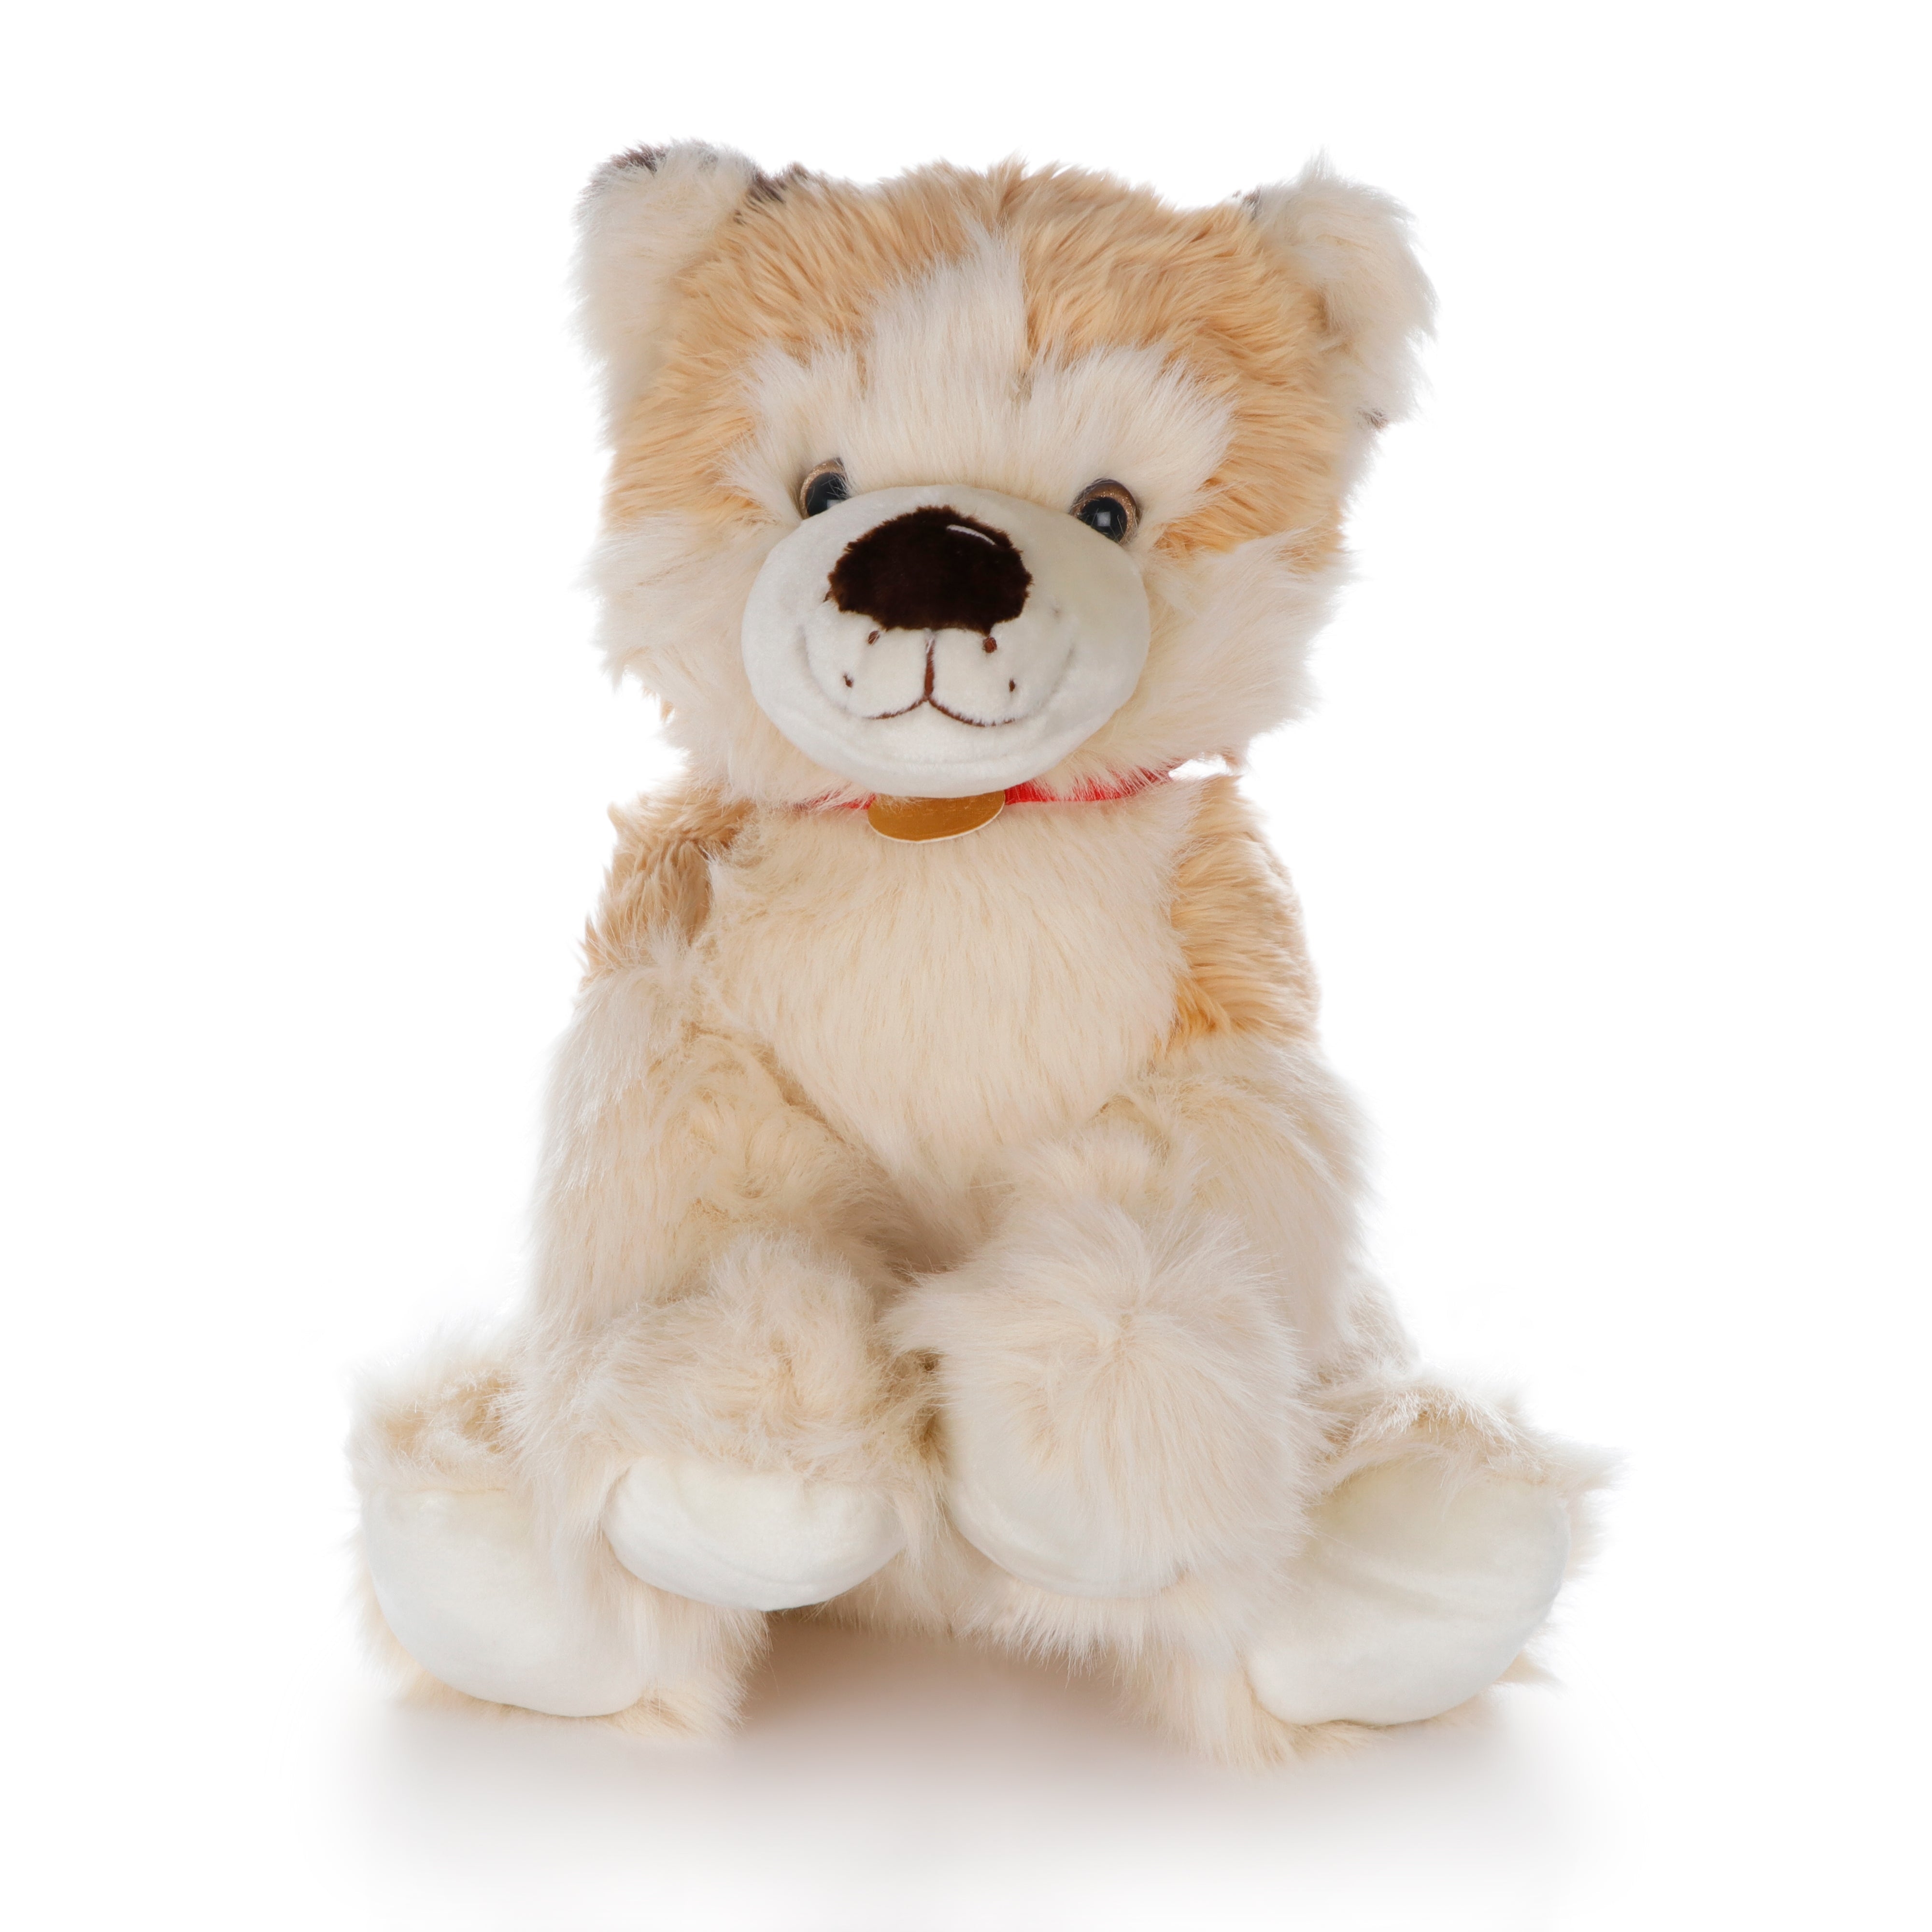 Archies | Archies Beige Soft Toys, Teddy Bear For Girls, Soft Toys Boyfriend, Husband For Kids, Birthday Gift For Girls,Wife,   (Dog with Woof Tag -50CM)